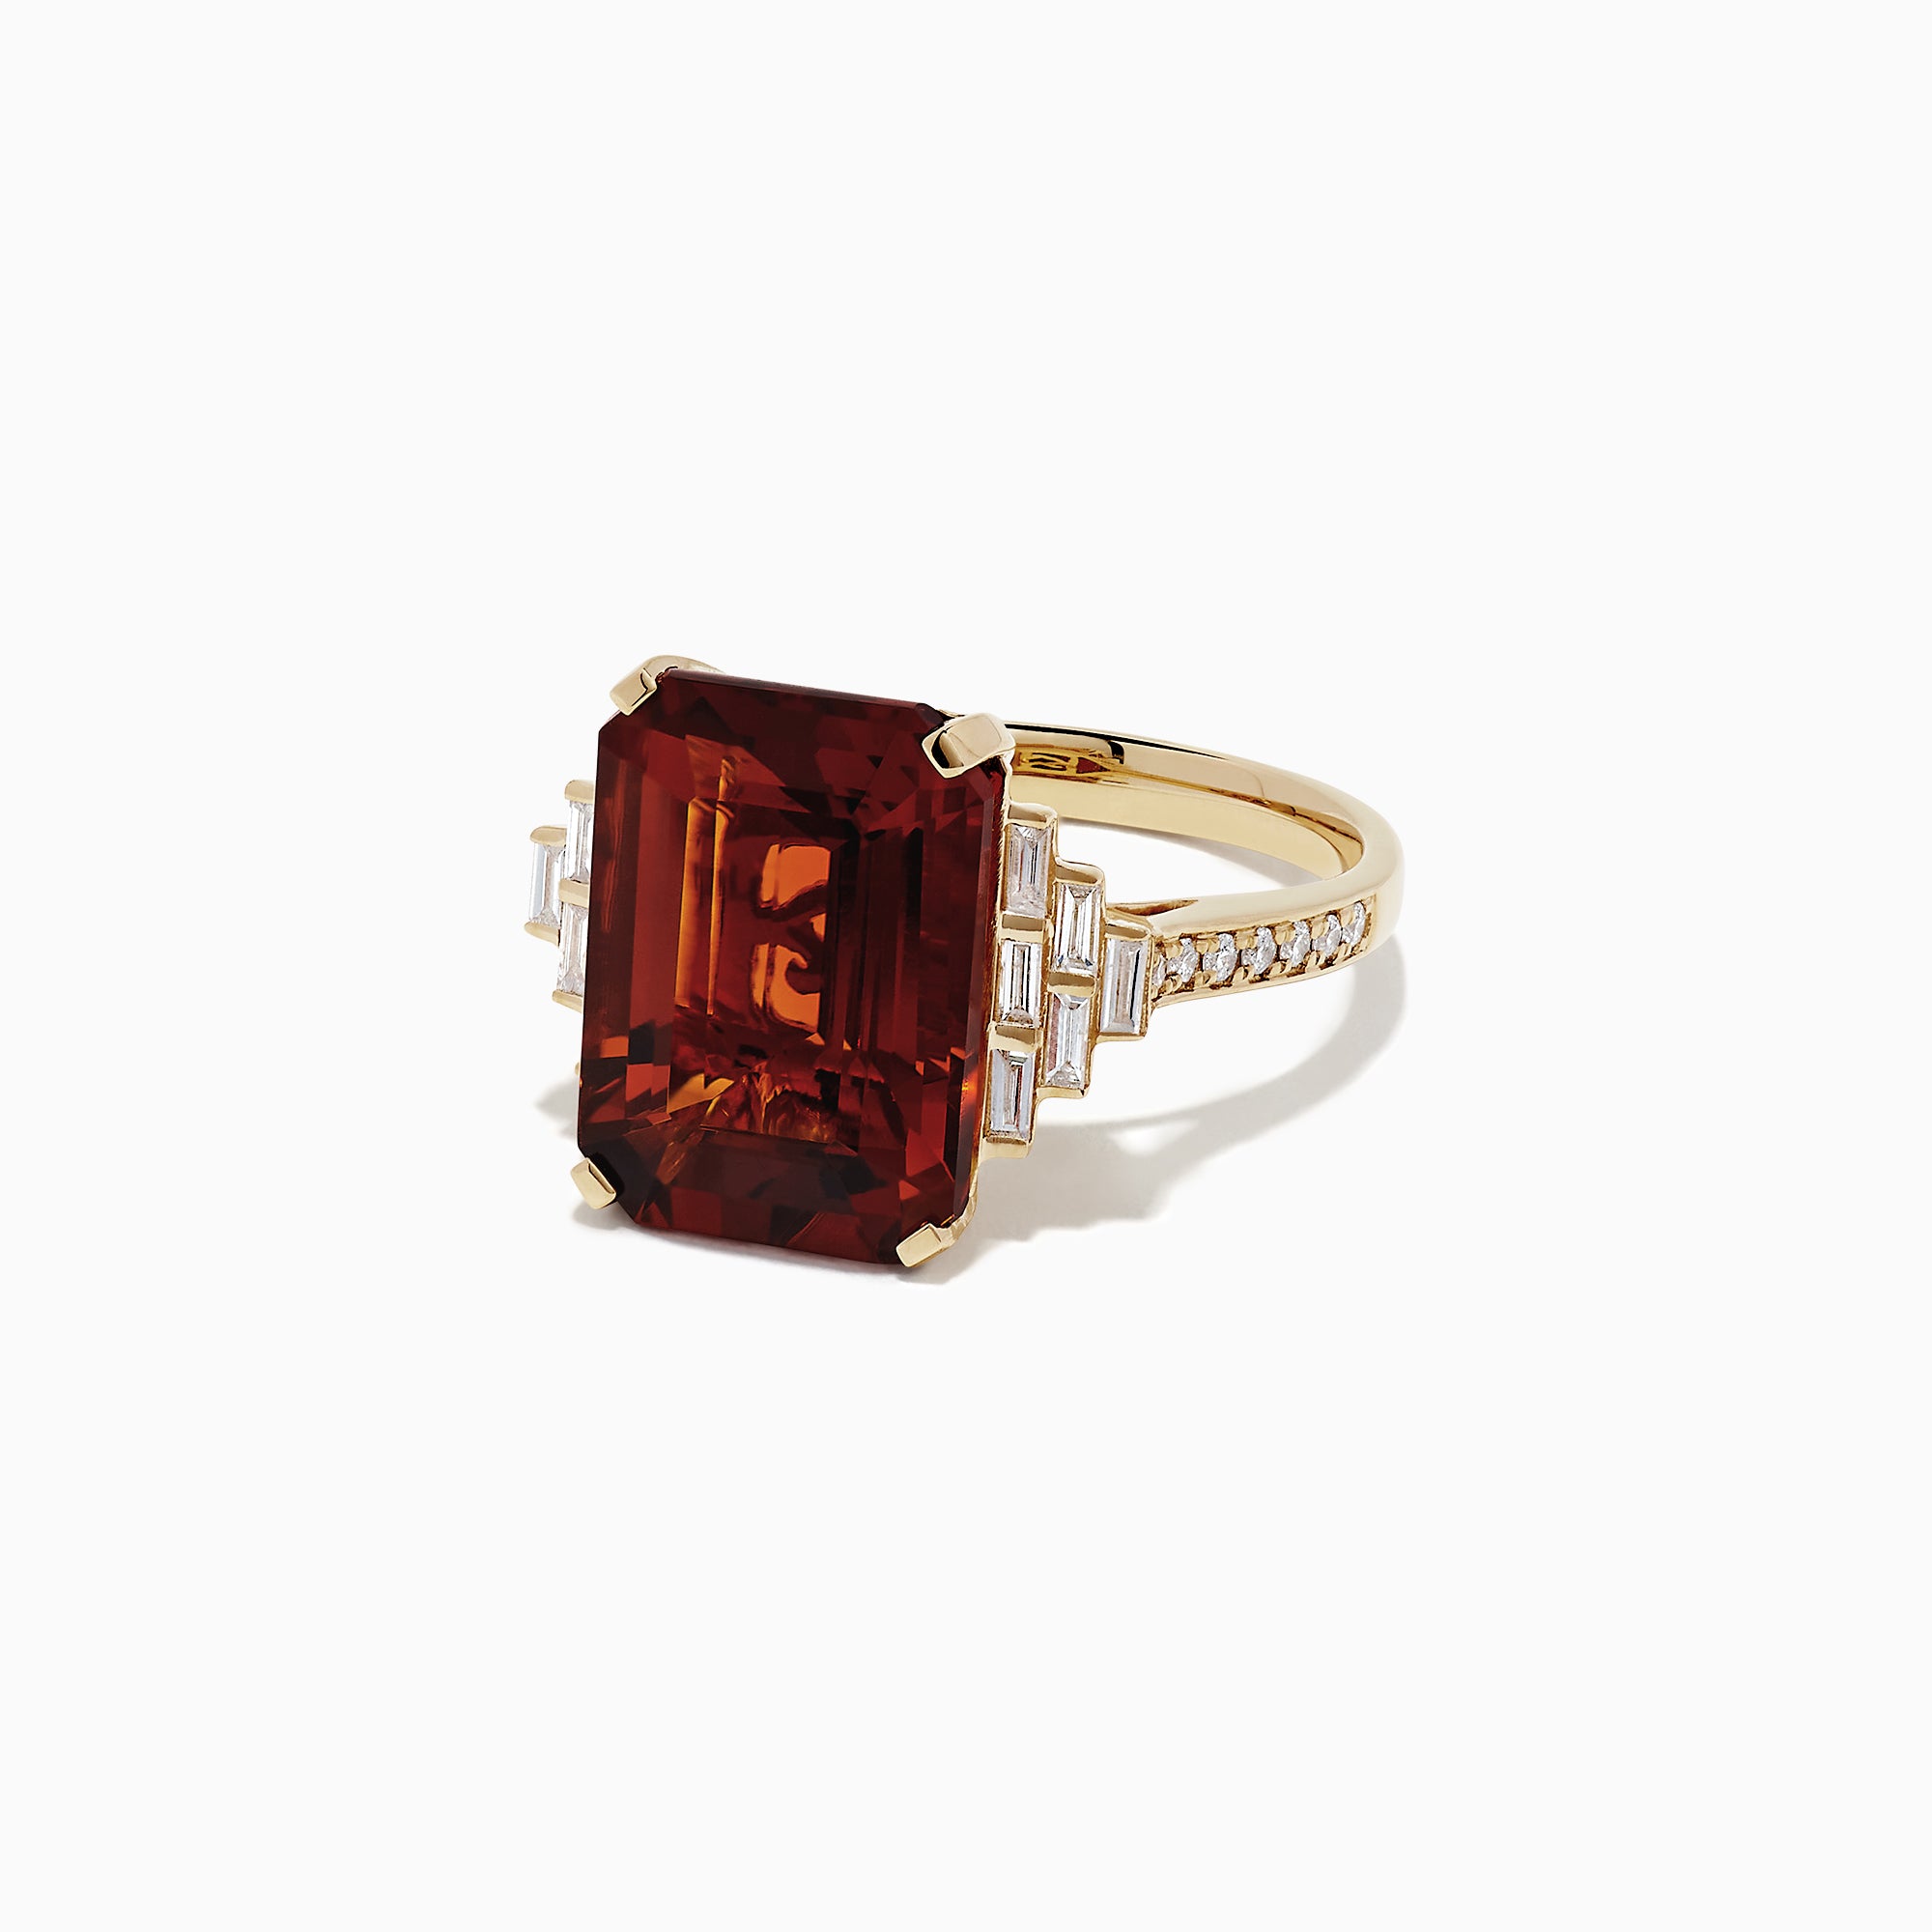 Effy Sunset 14K Yellow Gold Citrine and Diamond Cocktail Ring, 7.67 TCW